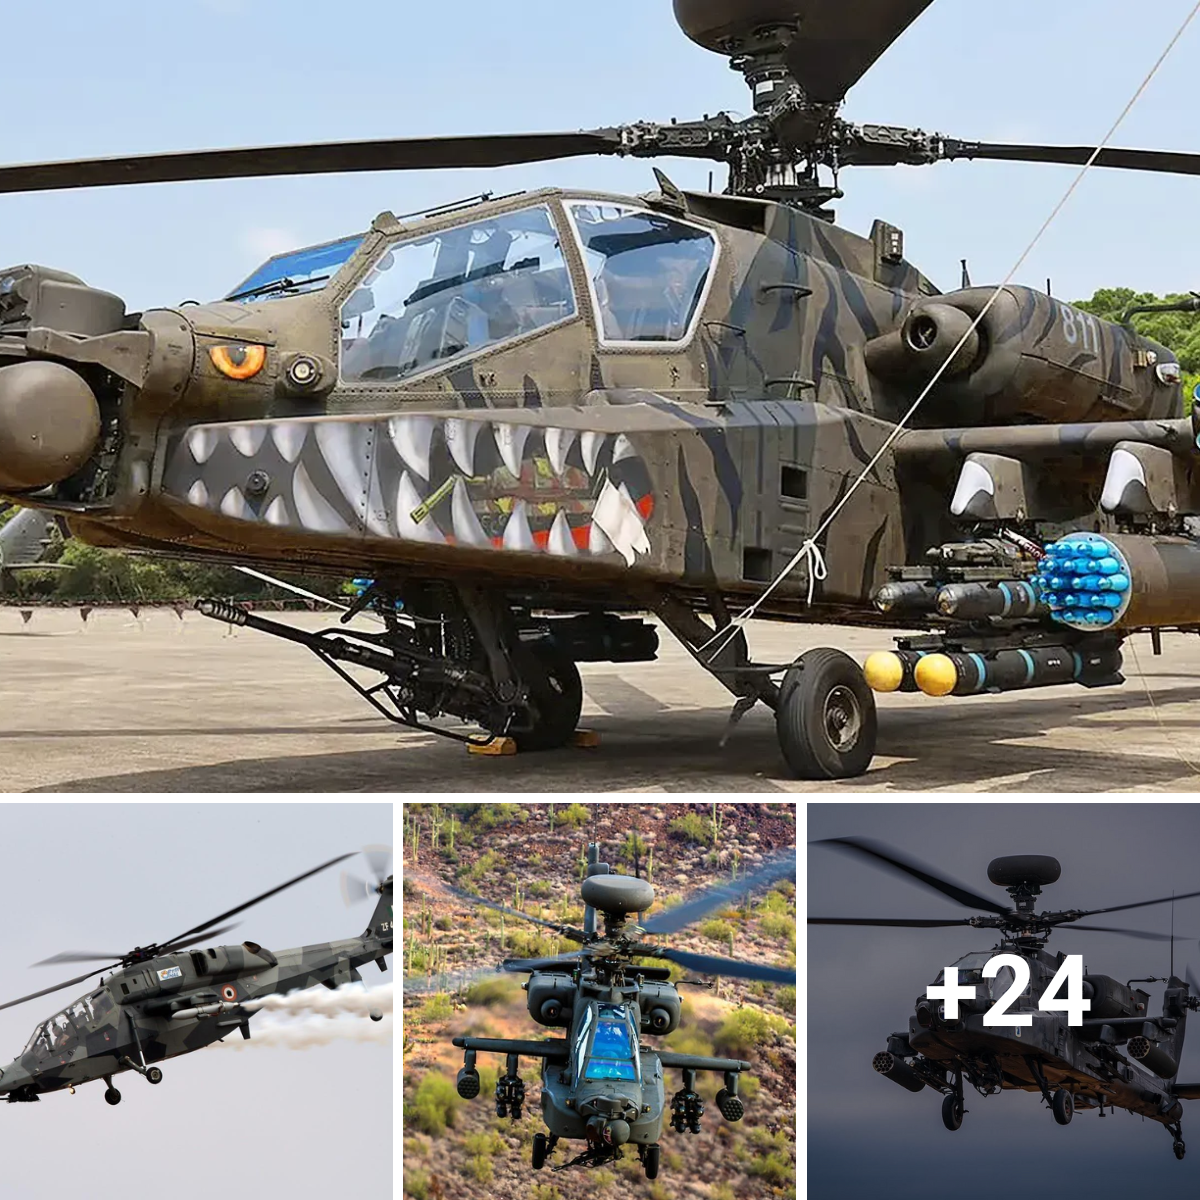 South Korea is going to purchase indigenous light attack helicopters and AH-64E attack helicopters.